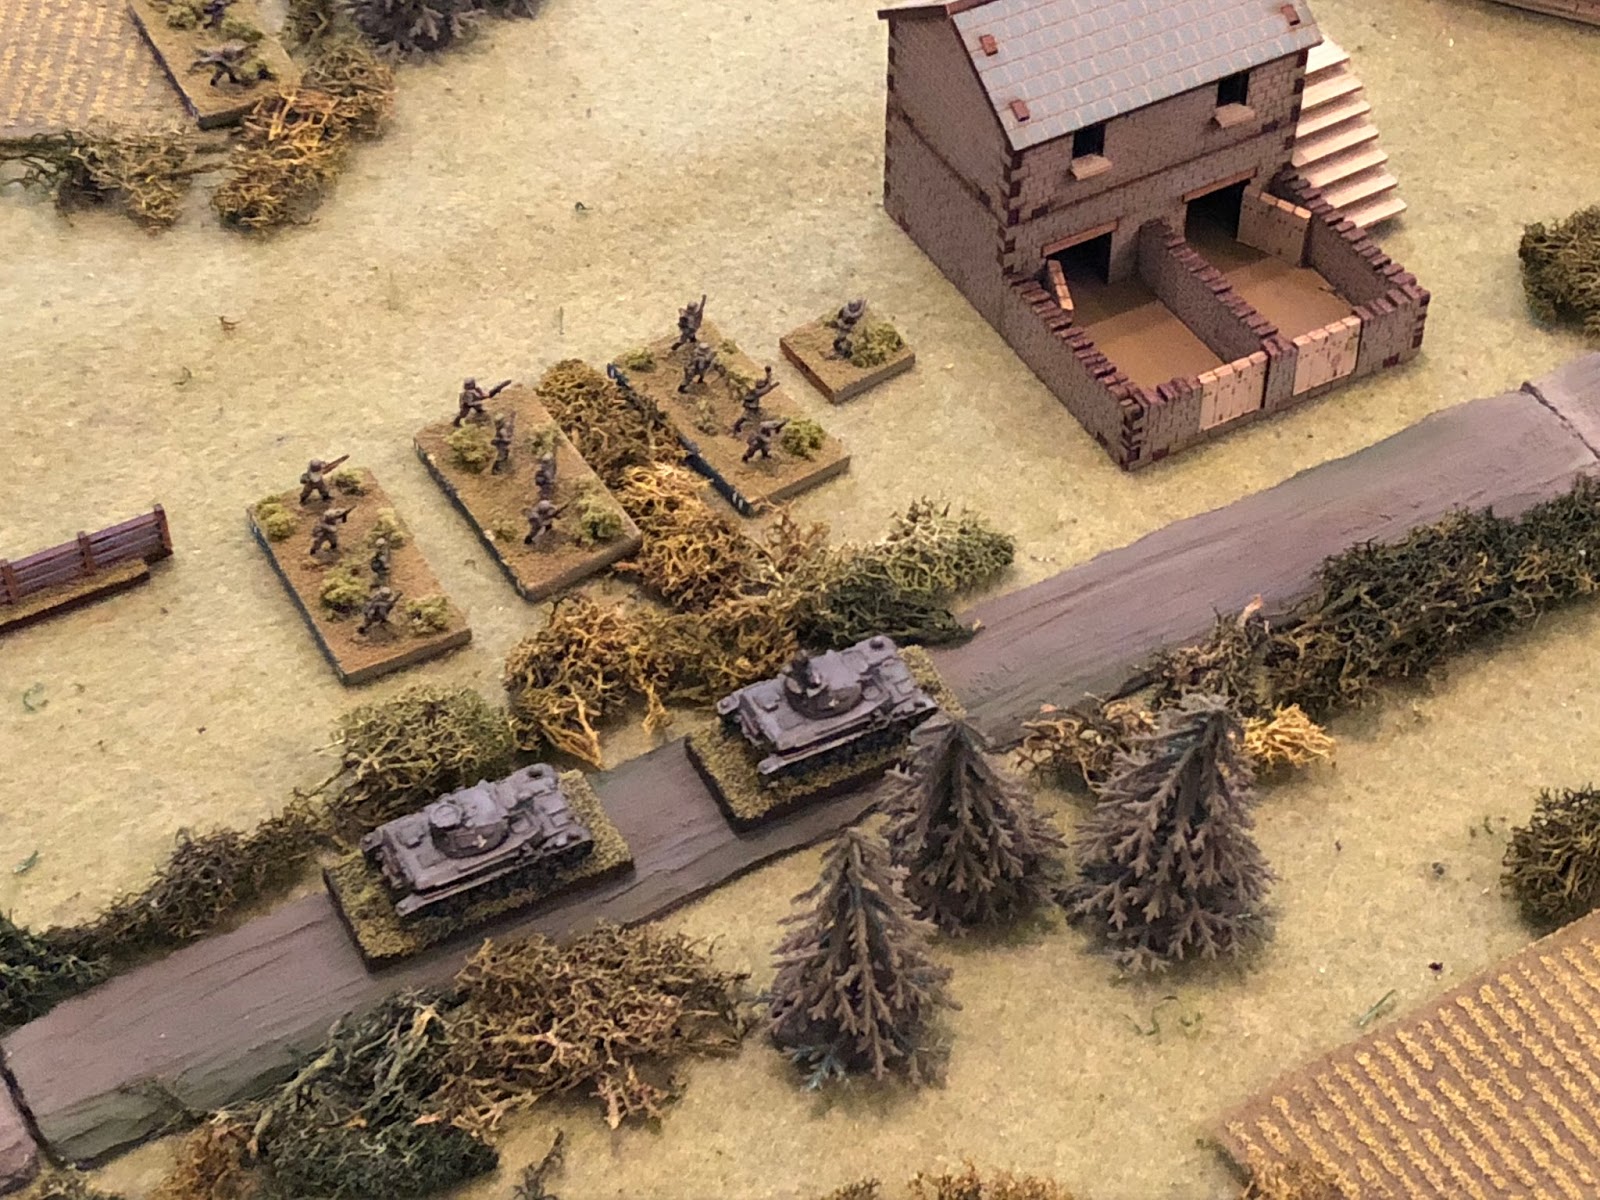  At this point the German commander can't take it anymore and kicks SSgt Janke and SSgt Mangold in their asses, screaming at them to get into the fight!&nbsp; They quickly stub out their cigarettes and head off to their waiting men and vehicles.  *I 